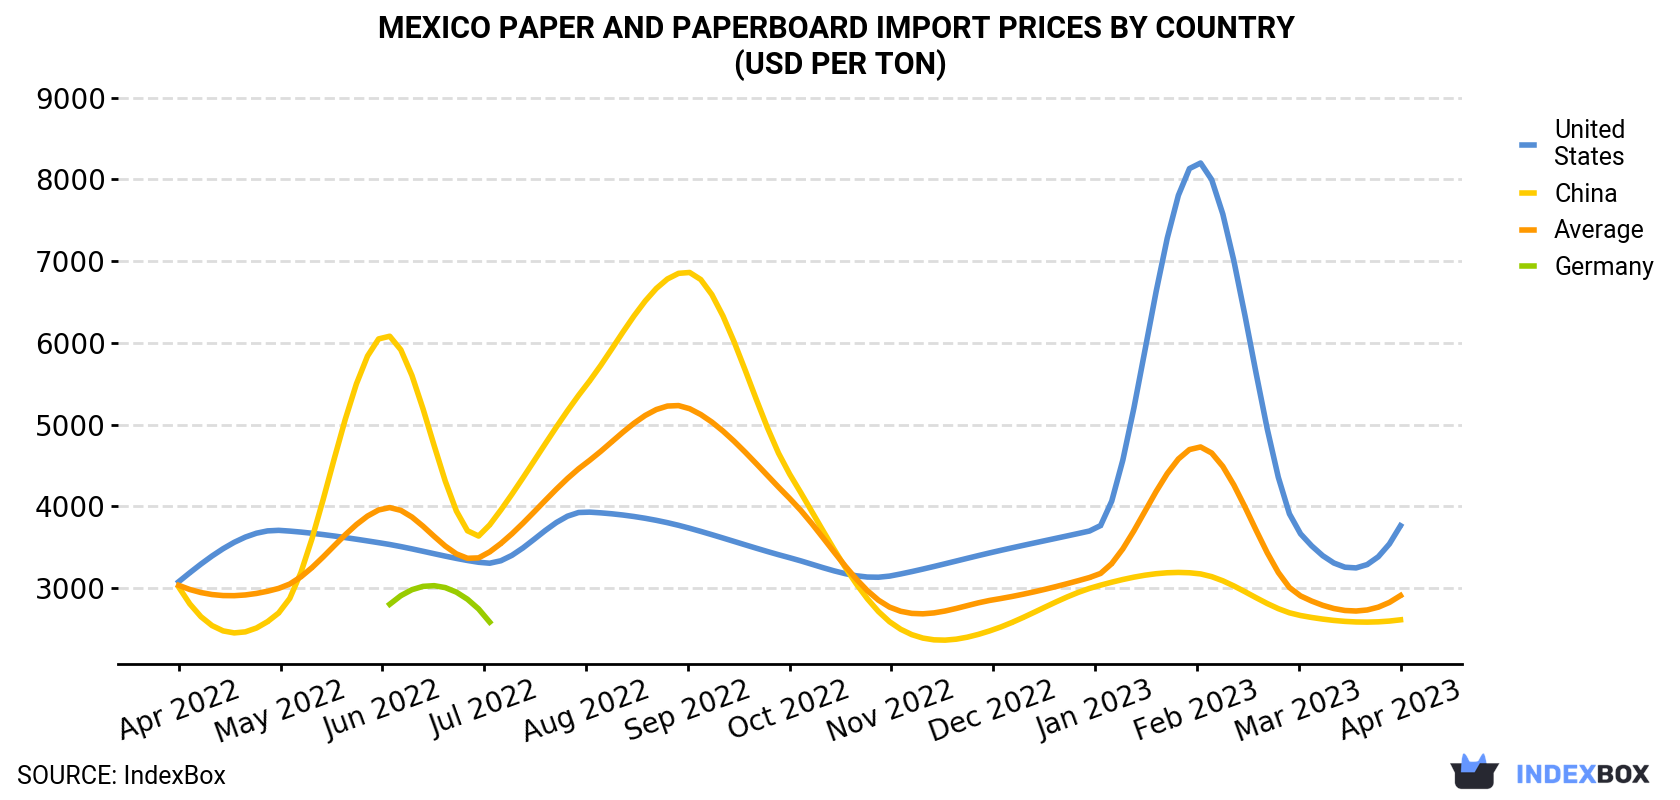 Mexico Paper And Paperboard Import Prices By Country (USD Per Ton)